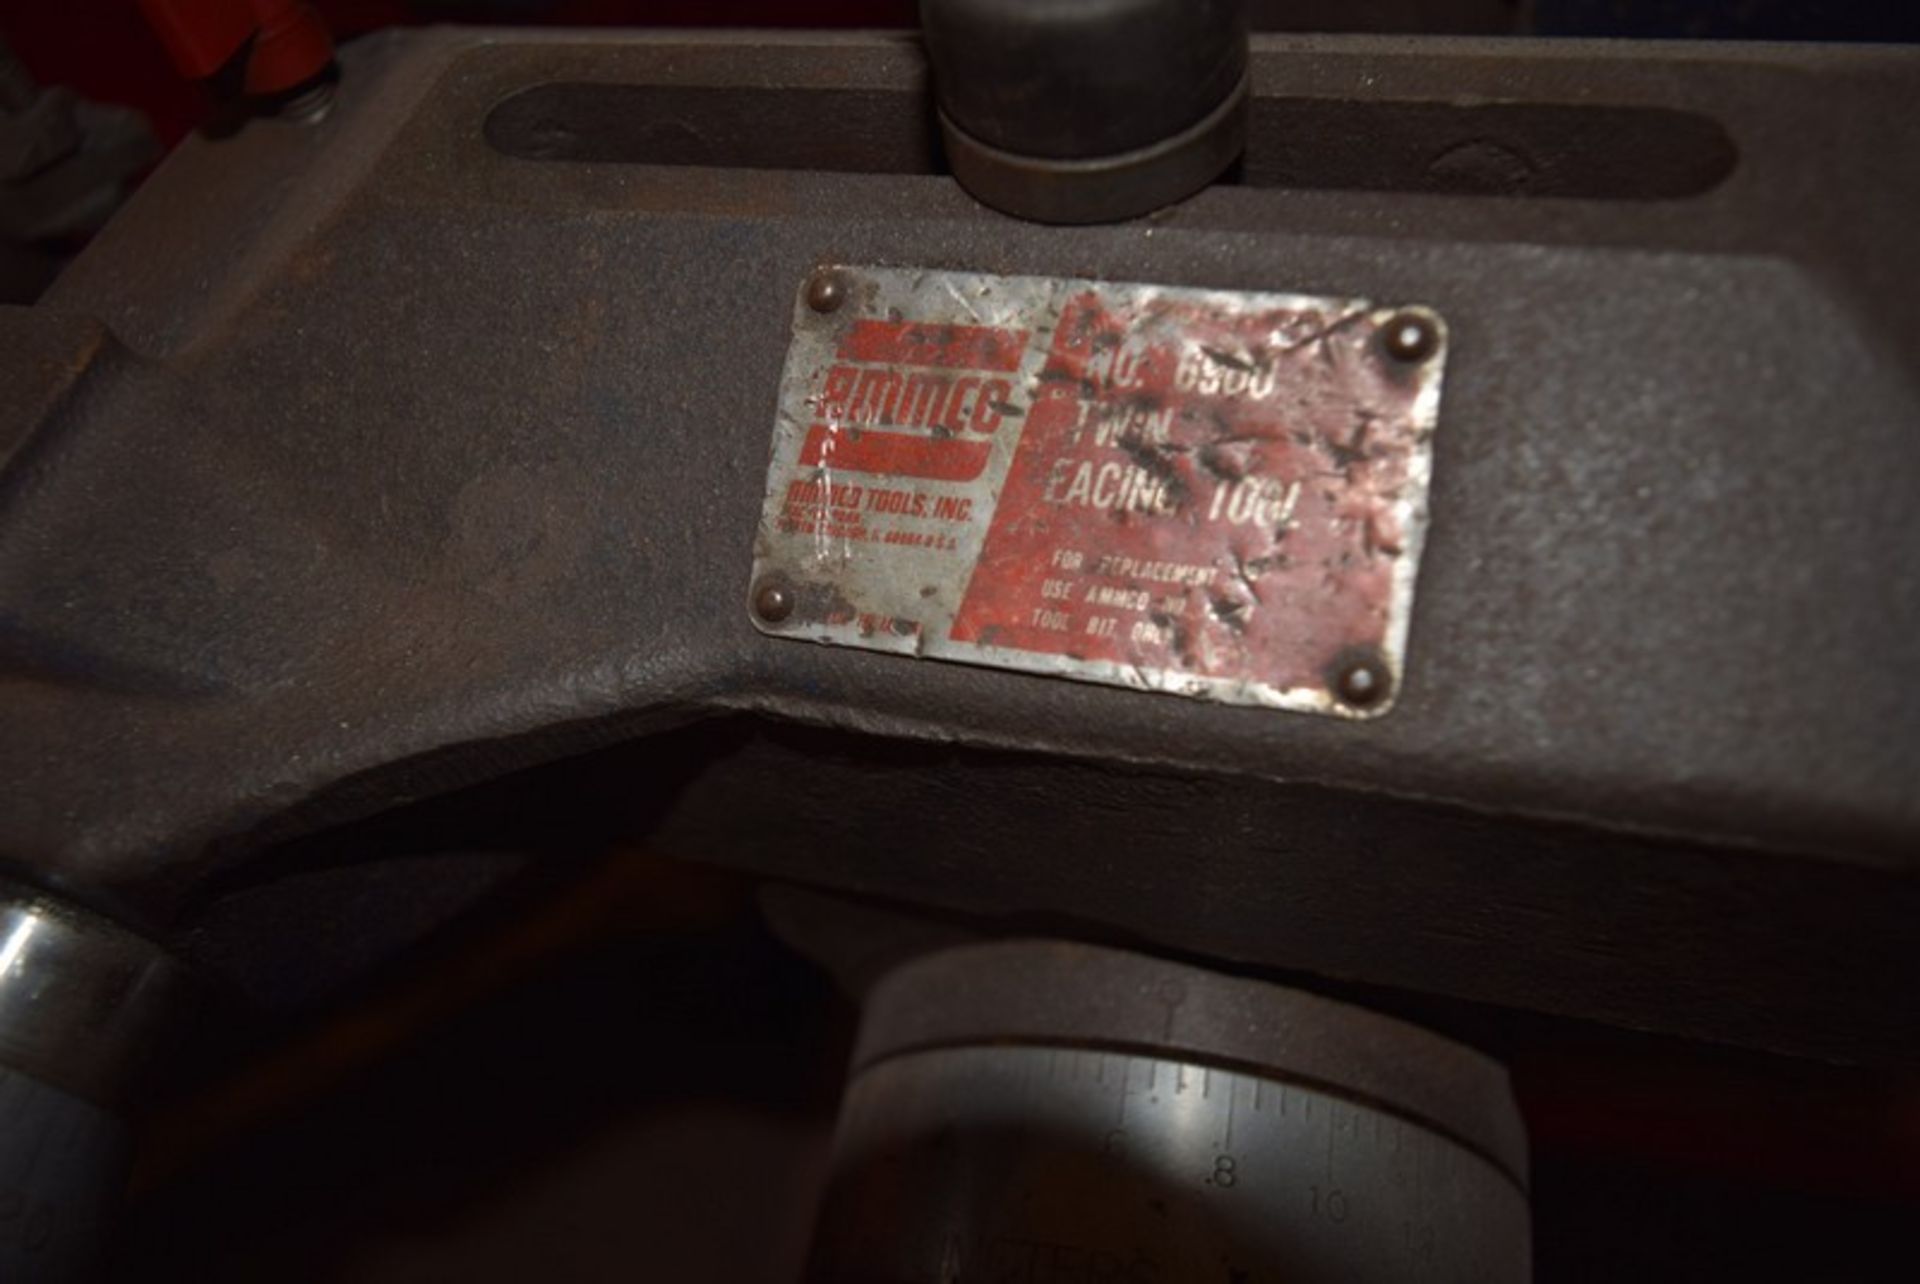 AMMCO BRAKE LATHE S/N: 91264 W/ FACING TOOL ATTACHMENT ON AMMCO BENCH - Image 7 of 7